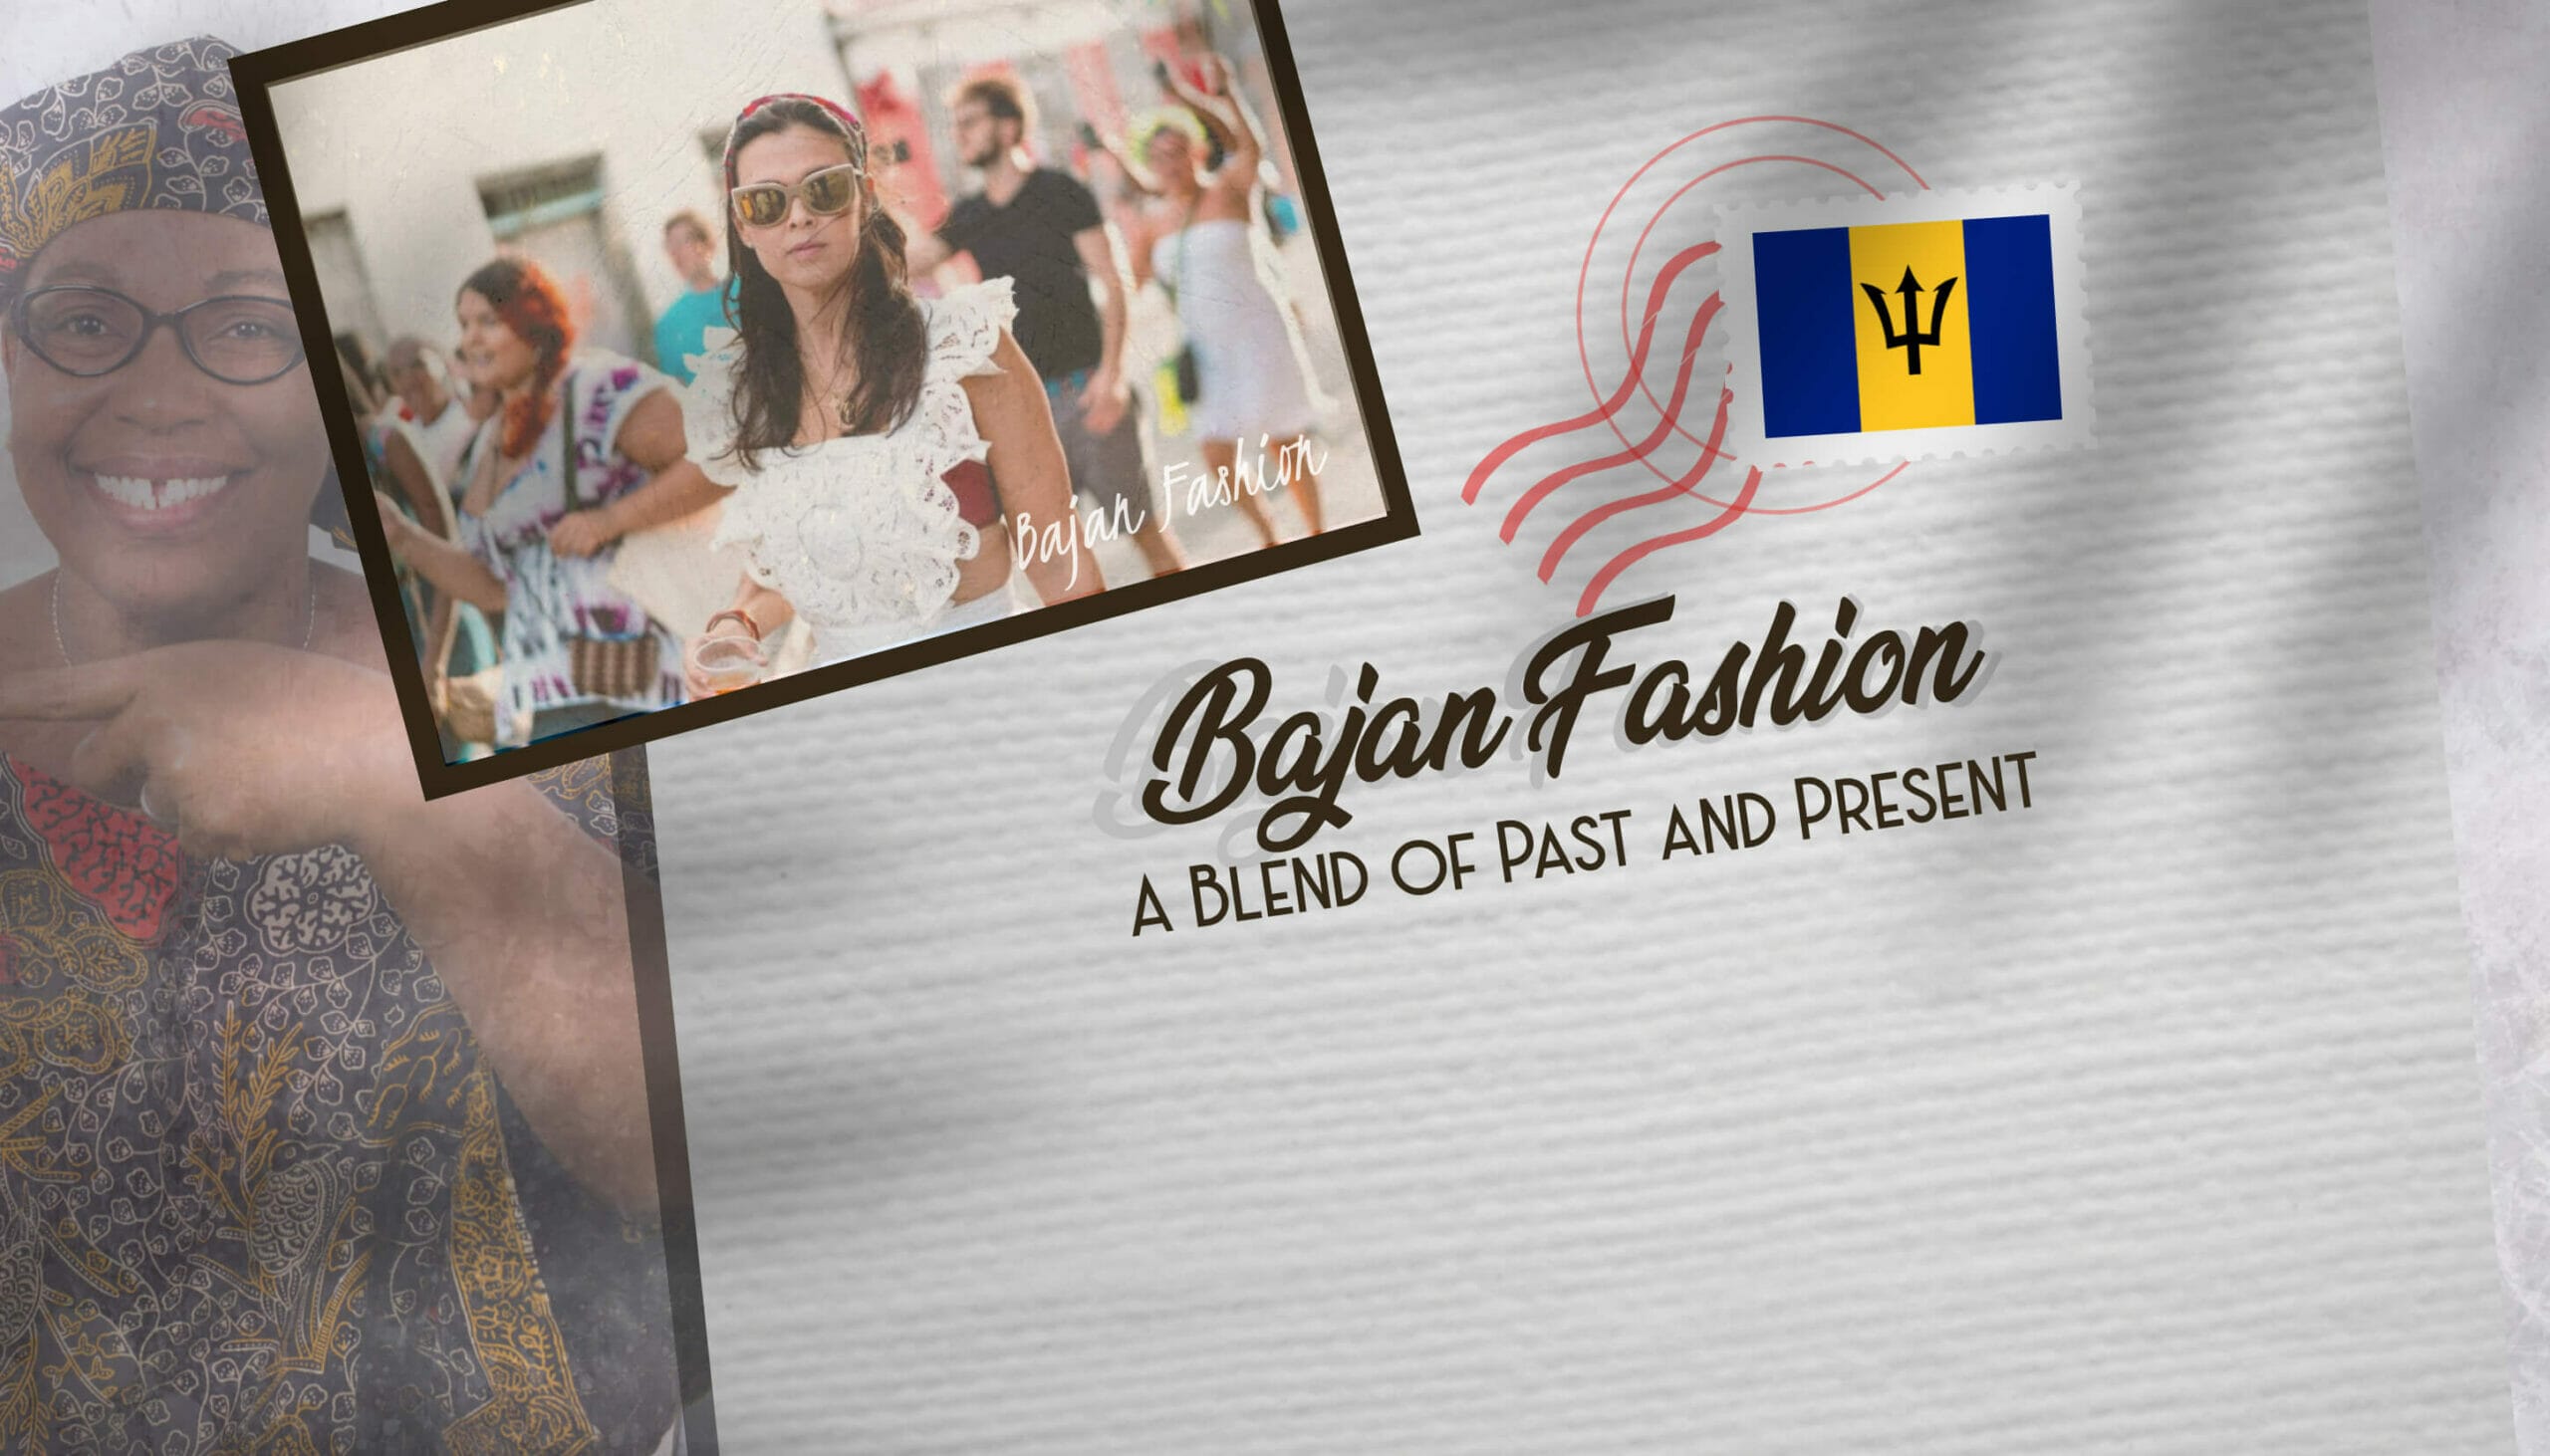 Bajan Fashion A Blend of Past and Present